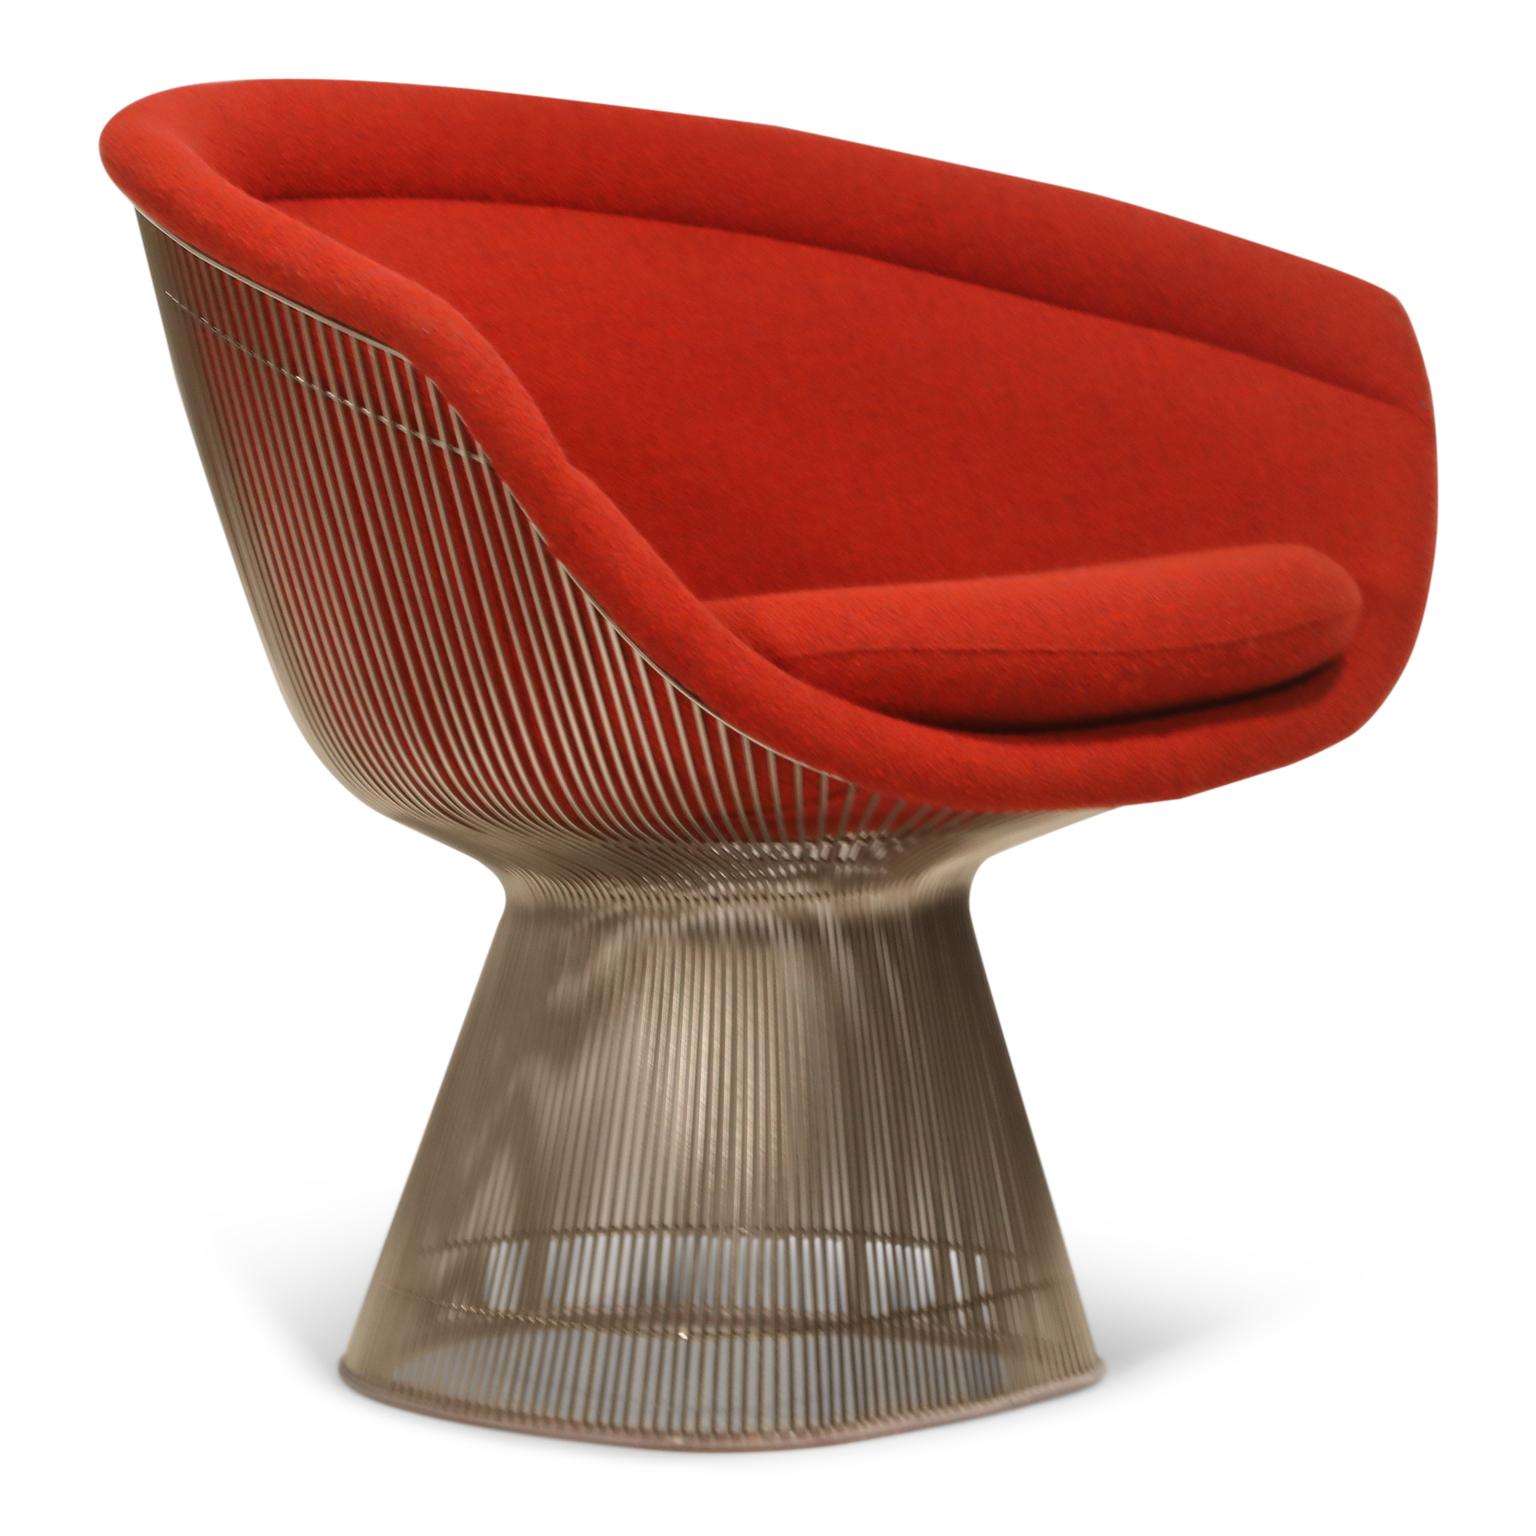 Mid-Century Modern Warren Platner for Knoll Lounge Chairs in Red Wool Boucle, Near Mint Set of Four